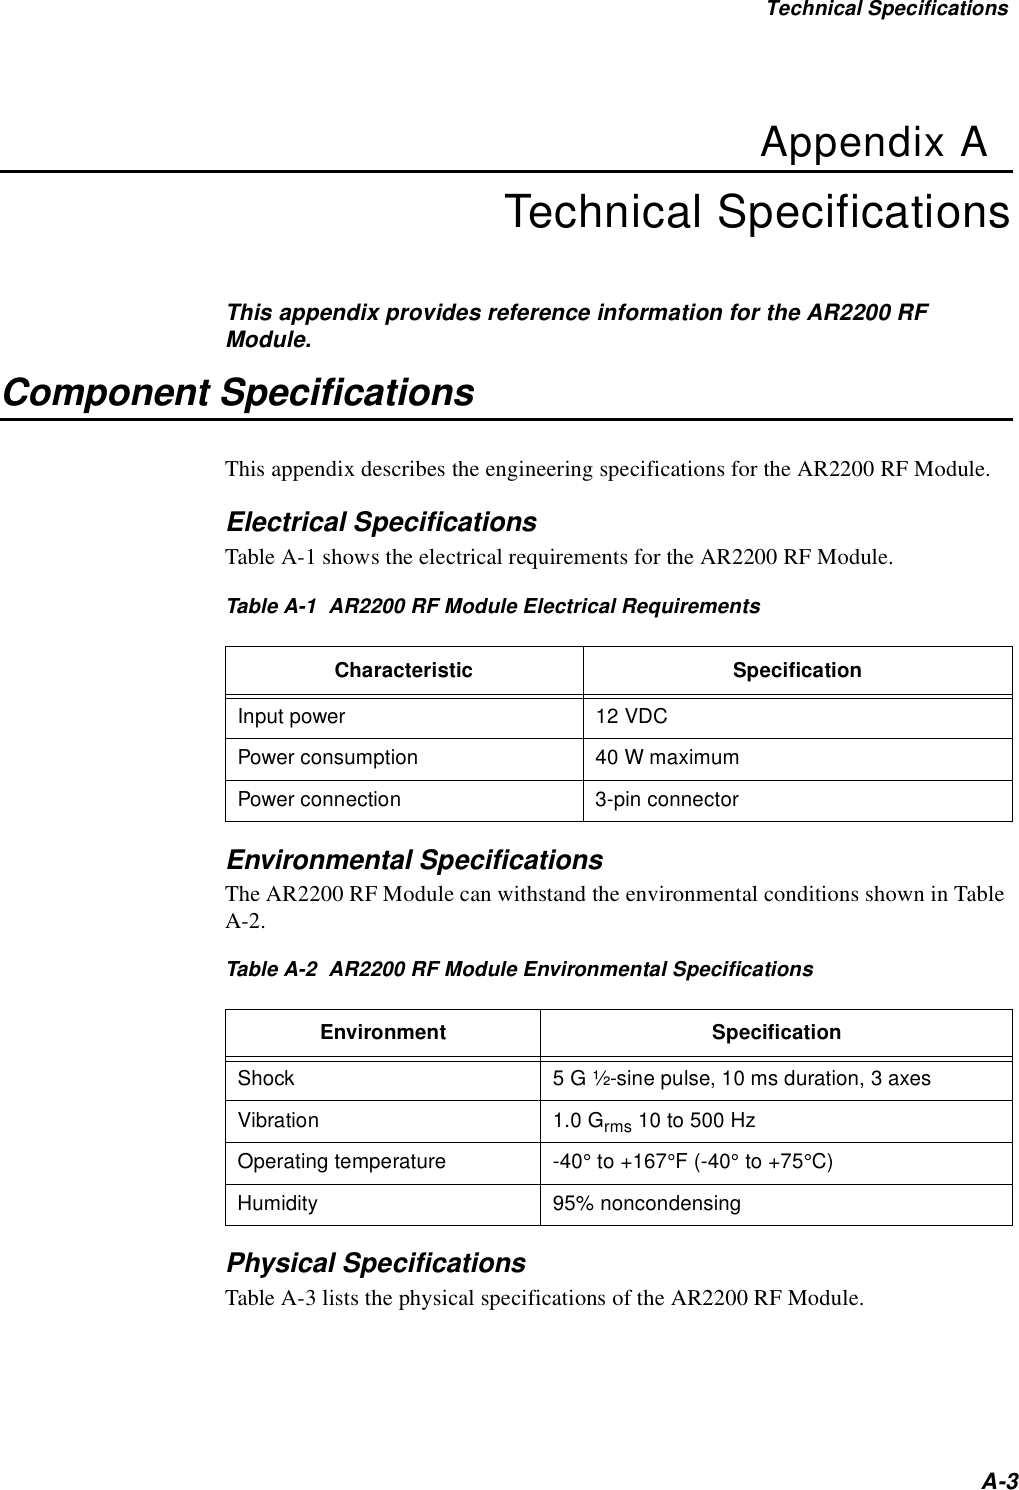 Technical SpecificationsA-3Appendix ATechnical SpecificationsThis appendix provides reference information for the AR2200 RF Module.Component SpecificationsThis appendix describes the engineering specifications for the AR2200 RF Module.Electrical SpecificationsTable A-1 shows the electrical requirements for the AR2200 RF Module.Table A-1  AR2200 RF Module Electrical RequirementsEnvironmental SpecificationsThe AR2200 RF Module can withstand the environmental conditions shown in Table A-2.Table A-2  AR2200 RF Module Environmental SpecificationsPhysical SpecificationsTable A-3 lists the physical specifications of the AR2200 RF Module.Characteristic SpecificationInput power 12 VDCPower consumption 40 W maximumPower connection 3-pin connectorEnvironment SpecificationShock 5 G ½-sine pulse, 10 ms duration, 3 axesVibration 1.0 Grms 10 to 500 HzOperating temperature -40° to +167°F (-40° to +75°C)Humidity 95% noncondensing